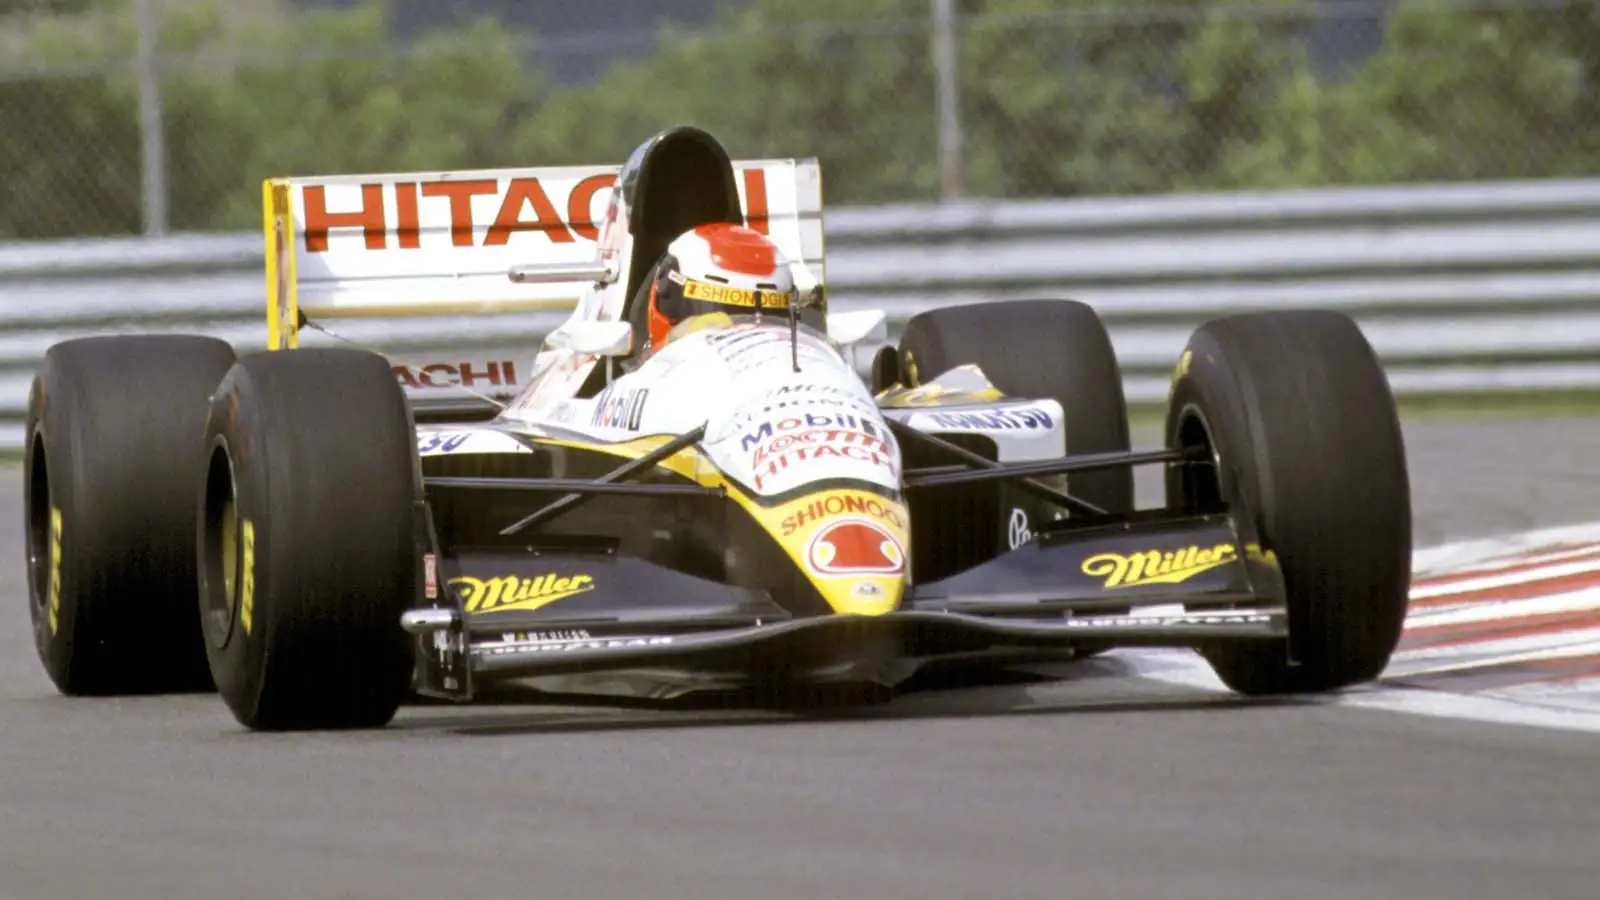 Team Lotus were wound up and out of F1 by 1995.